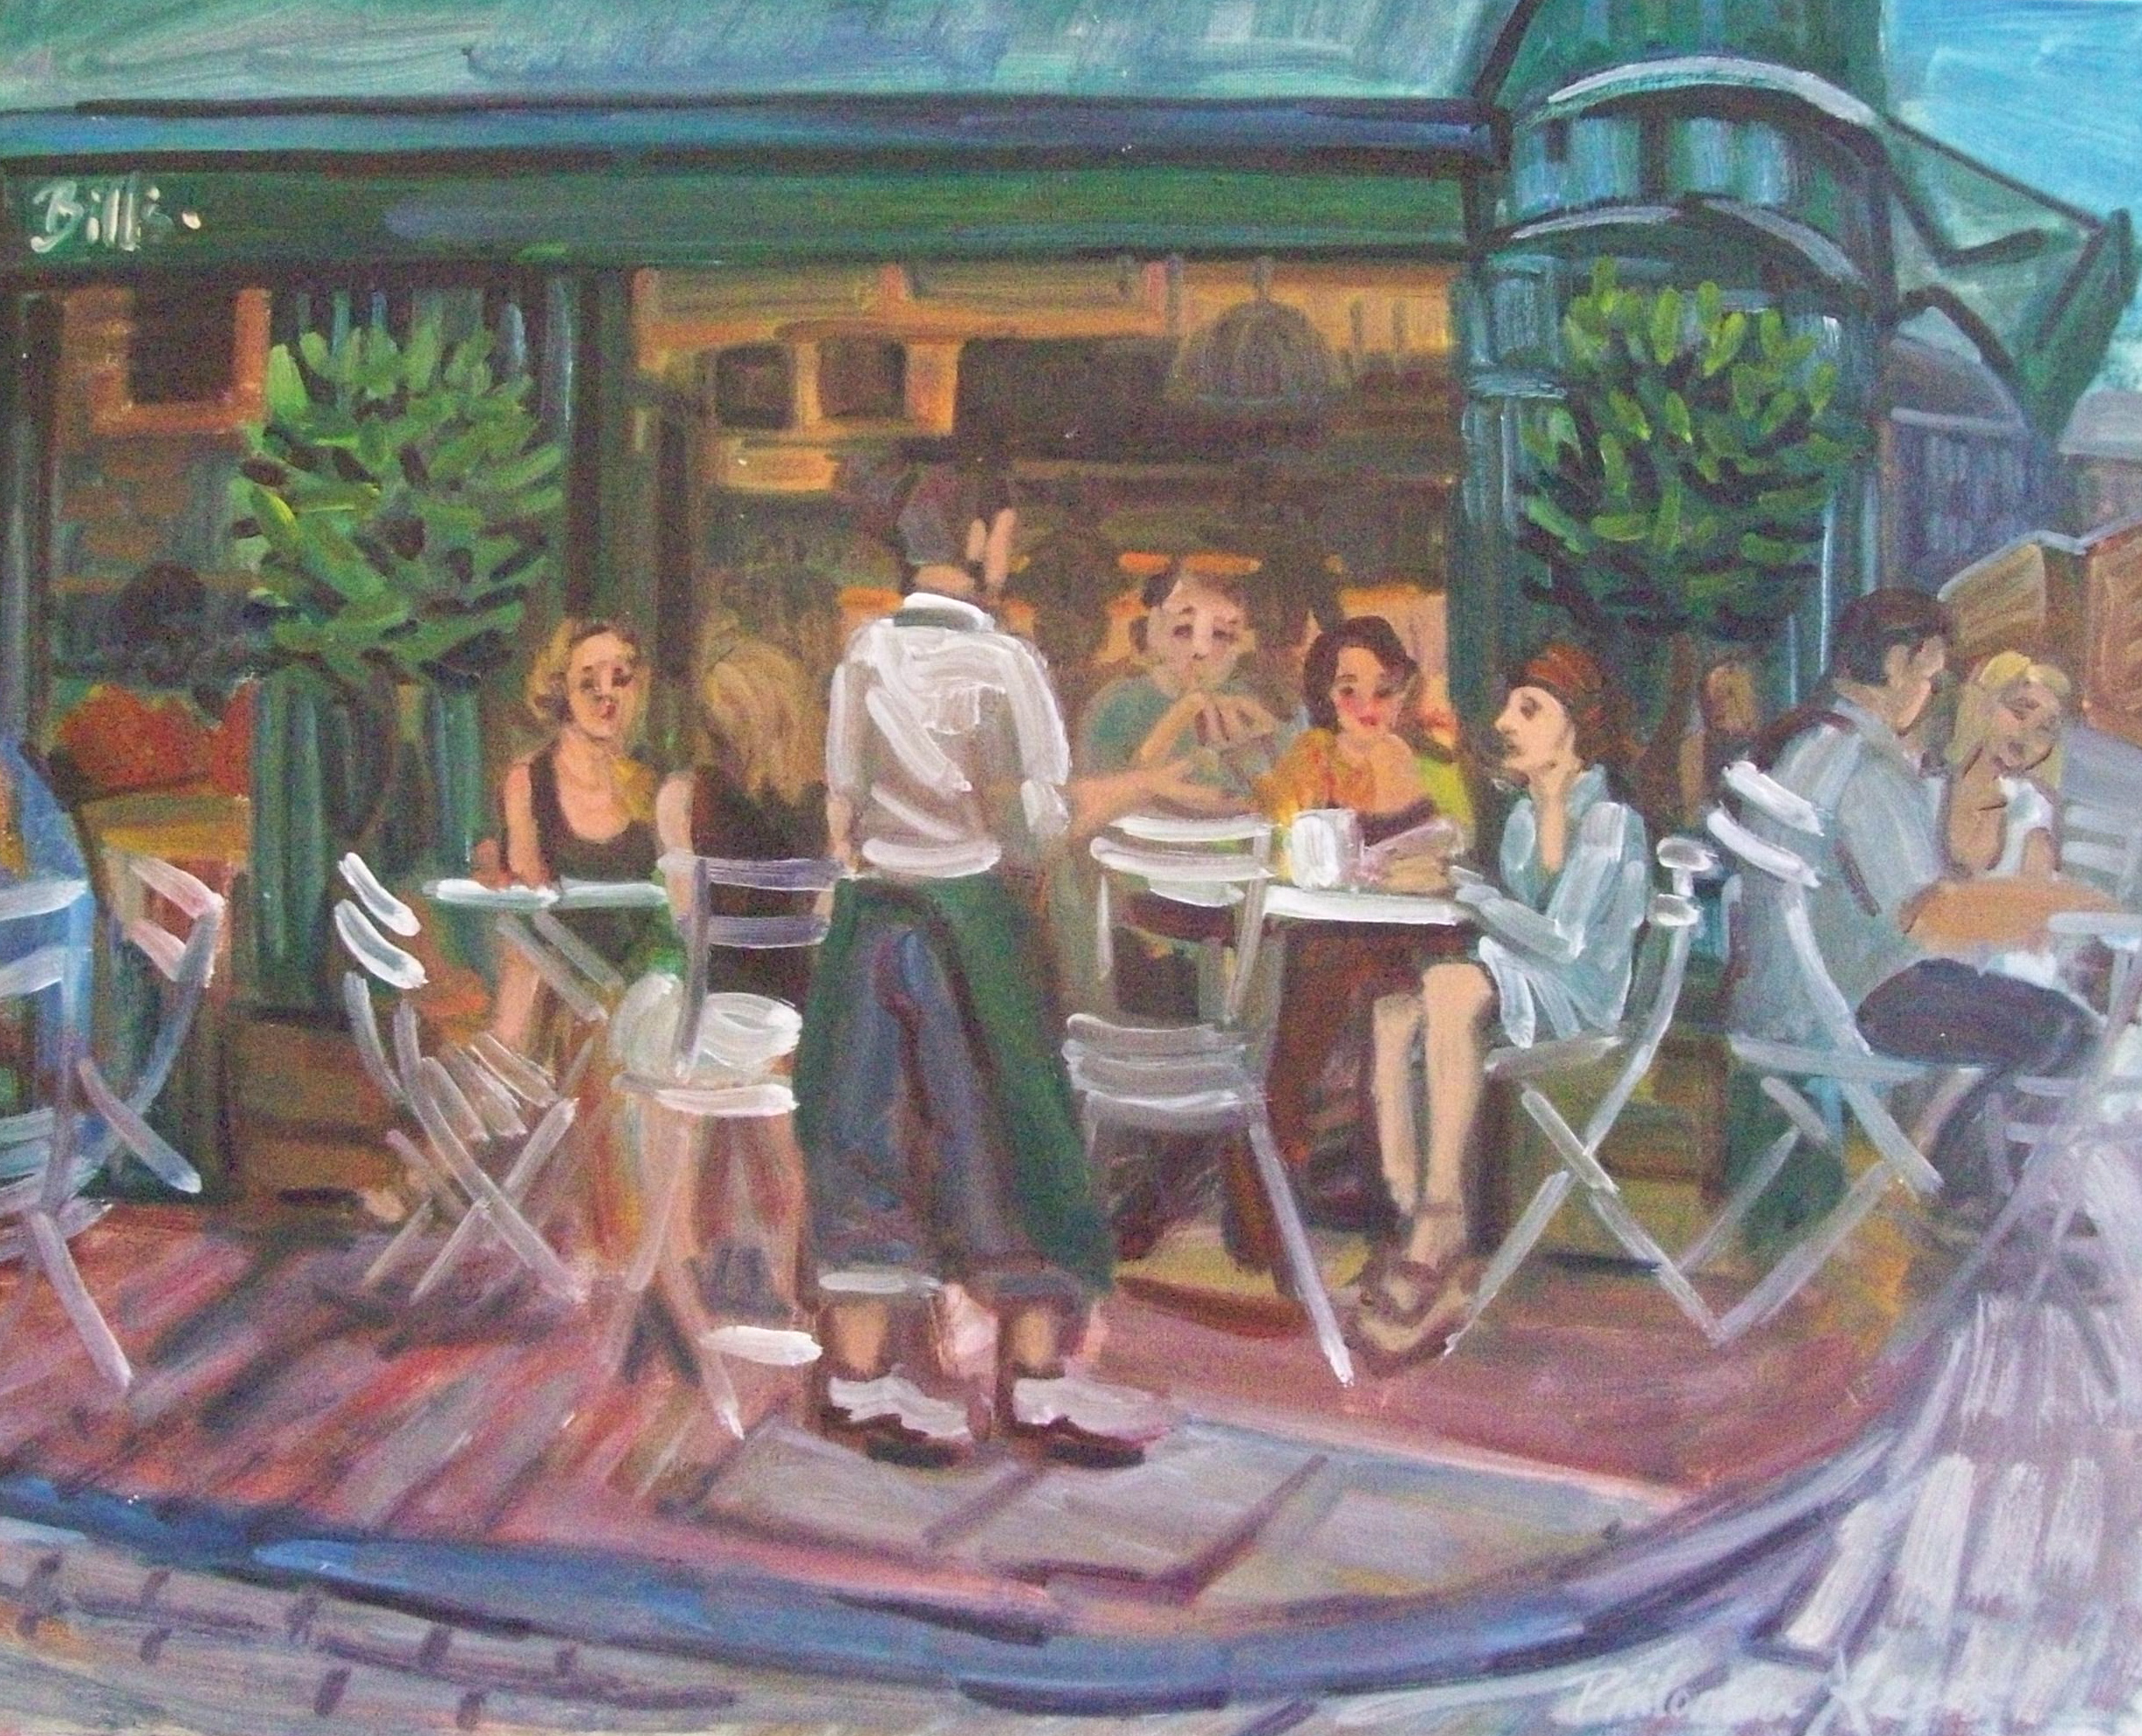 Bill's, Lewes, painting by Philomena Harmsworth